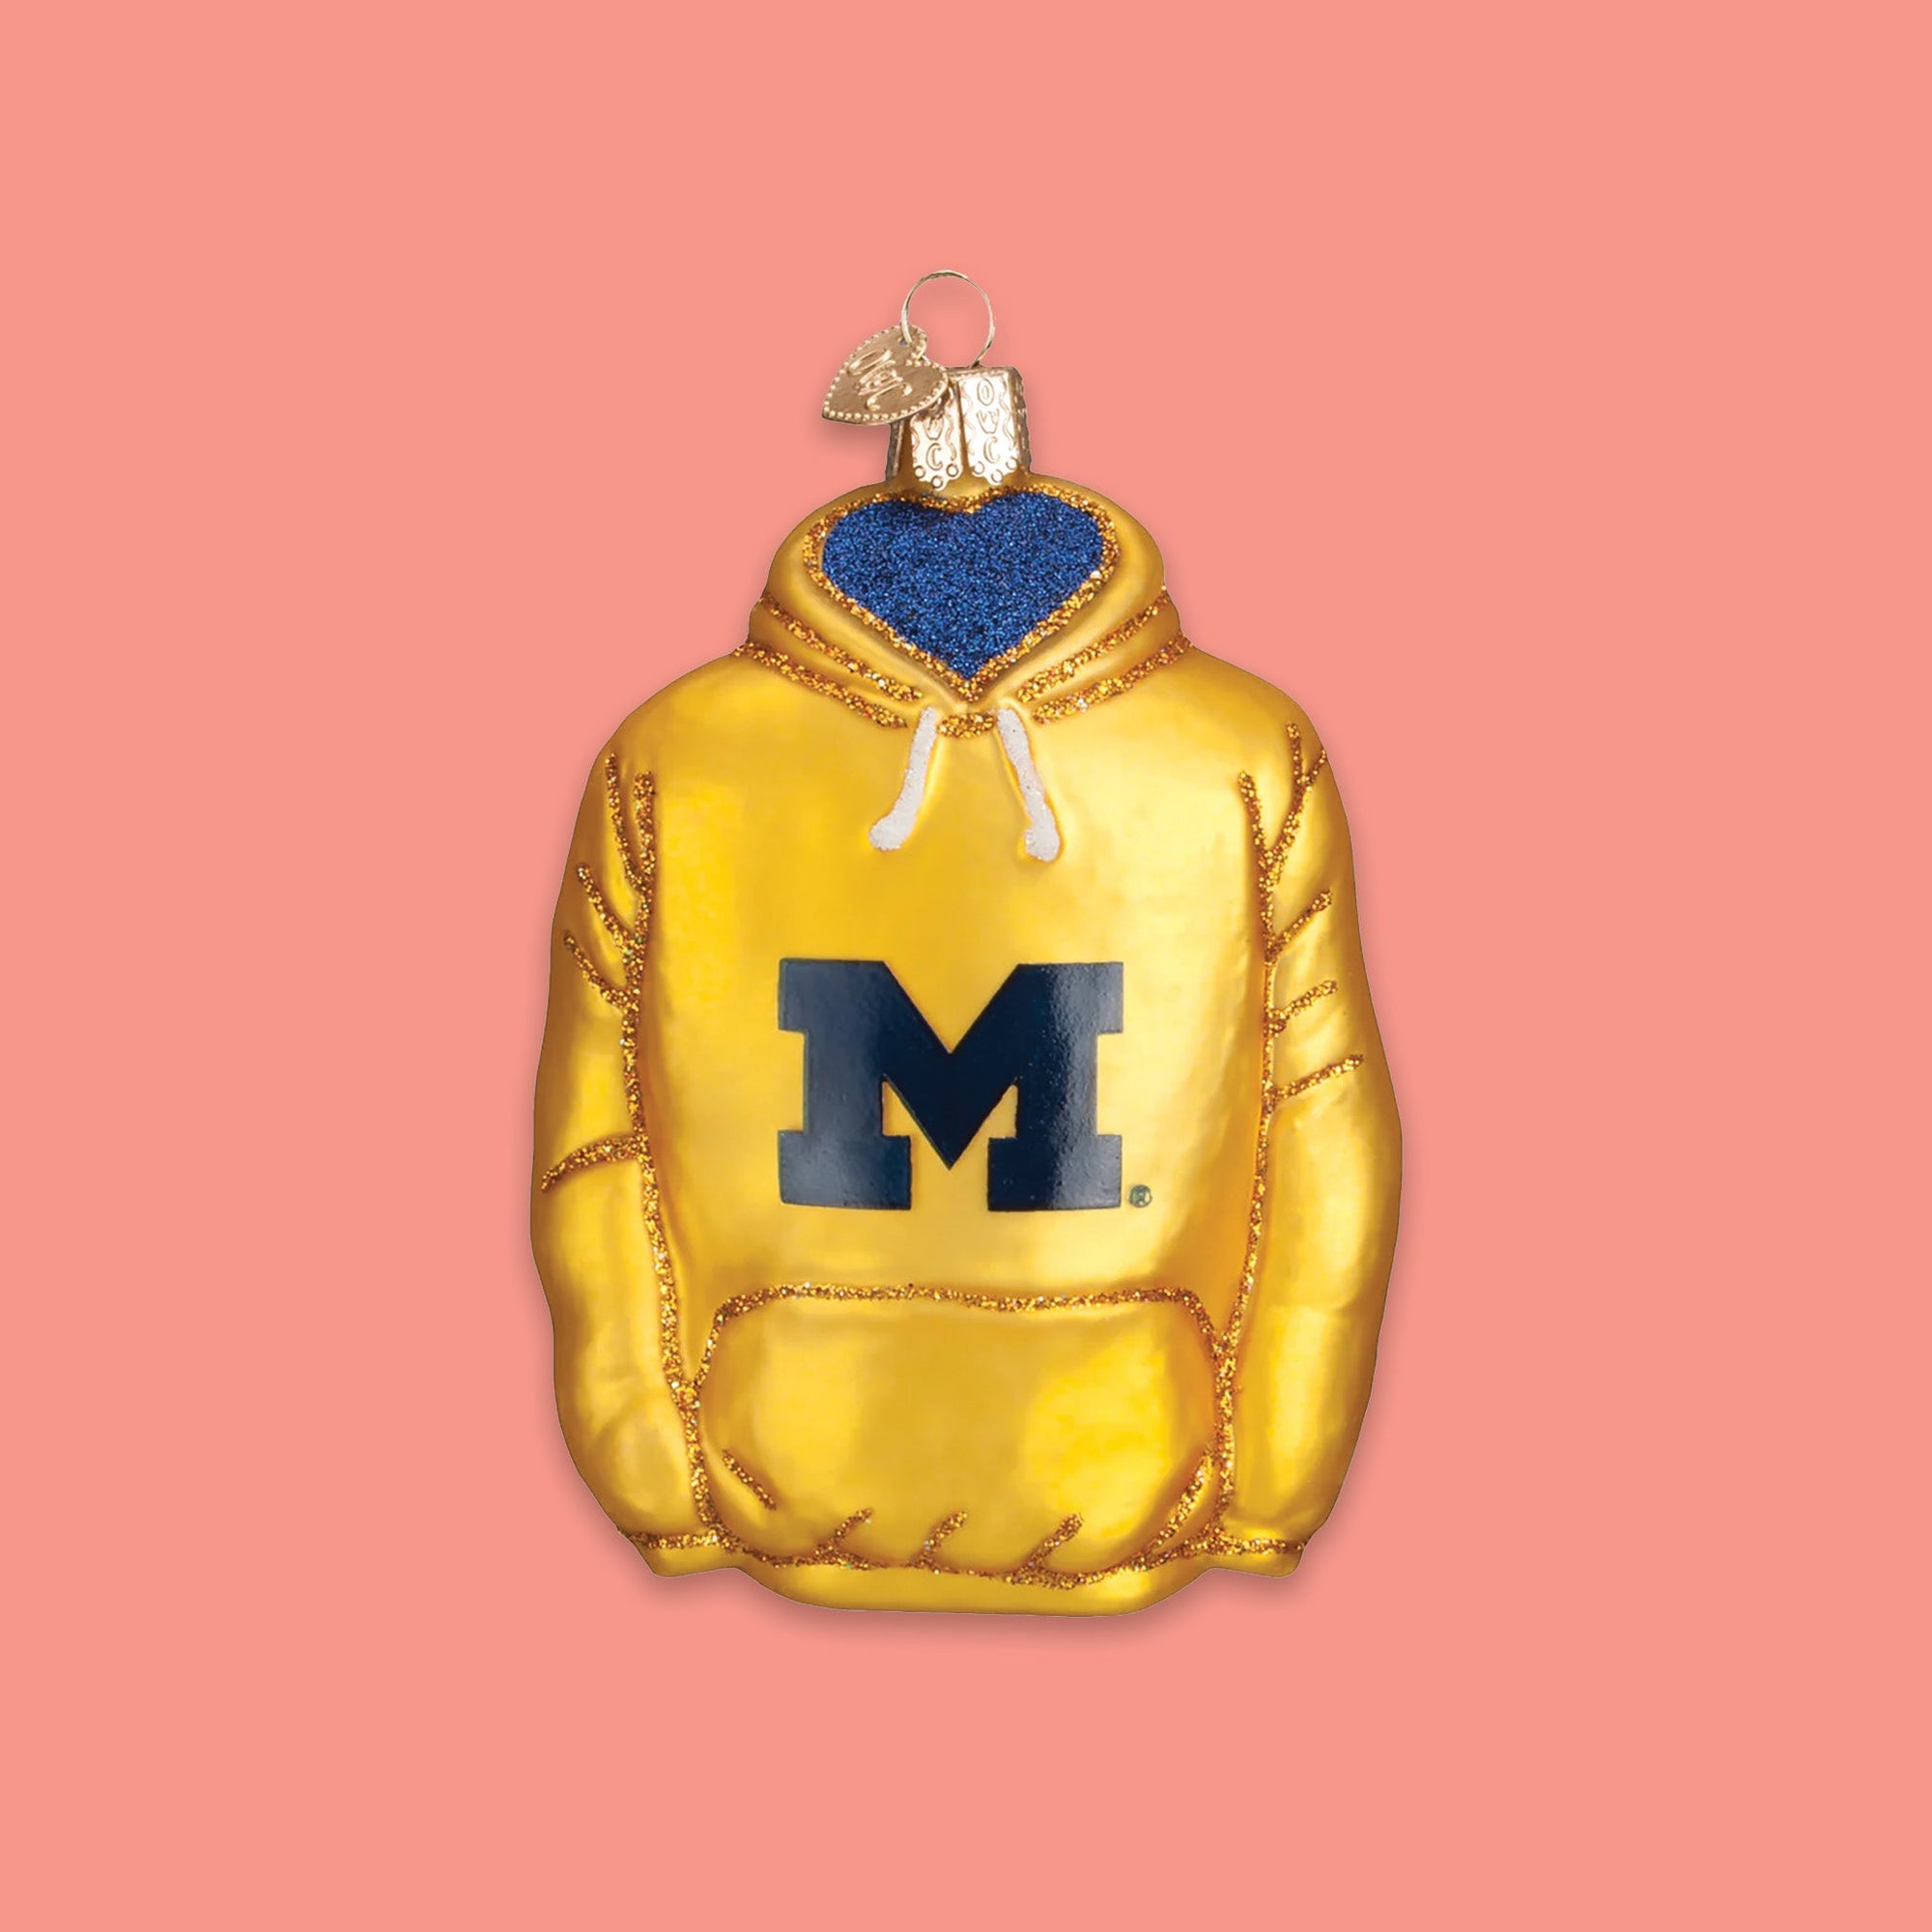 On a coral pink background sits a maize and navy University of Michigan hooded sweatshirt glass ornament. It has the letter "M" on it.